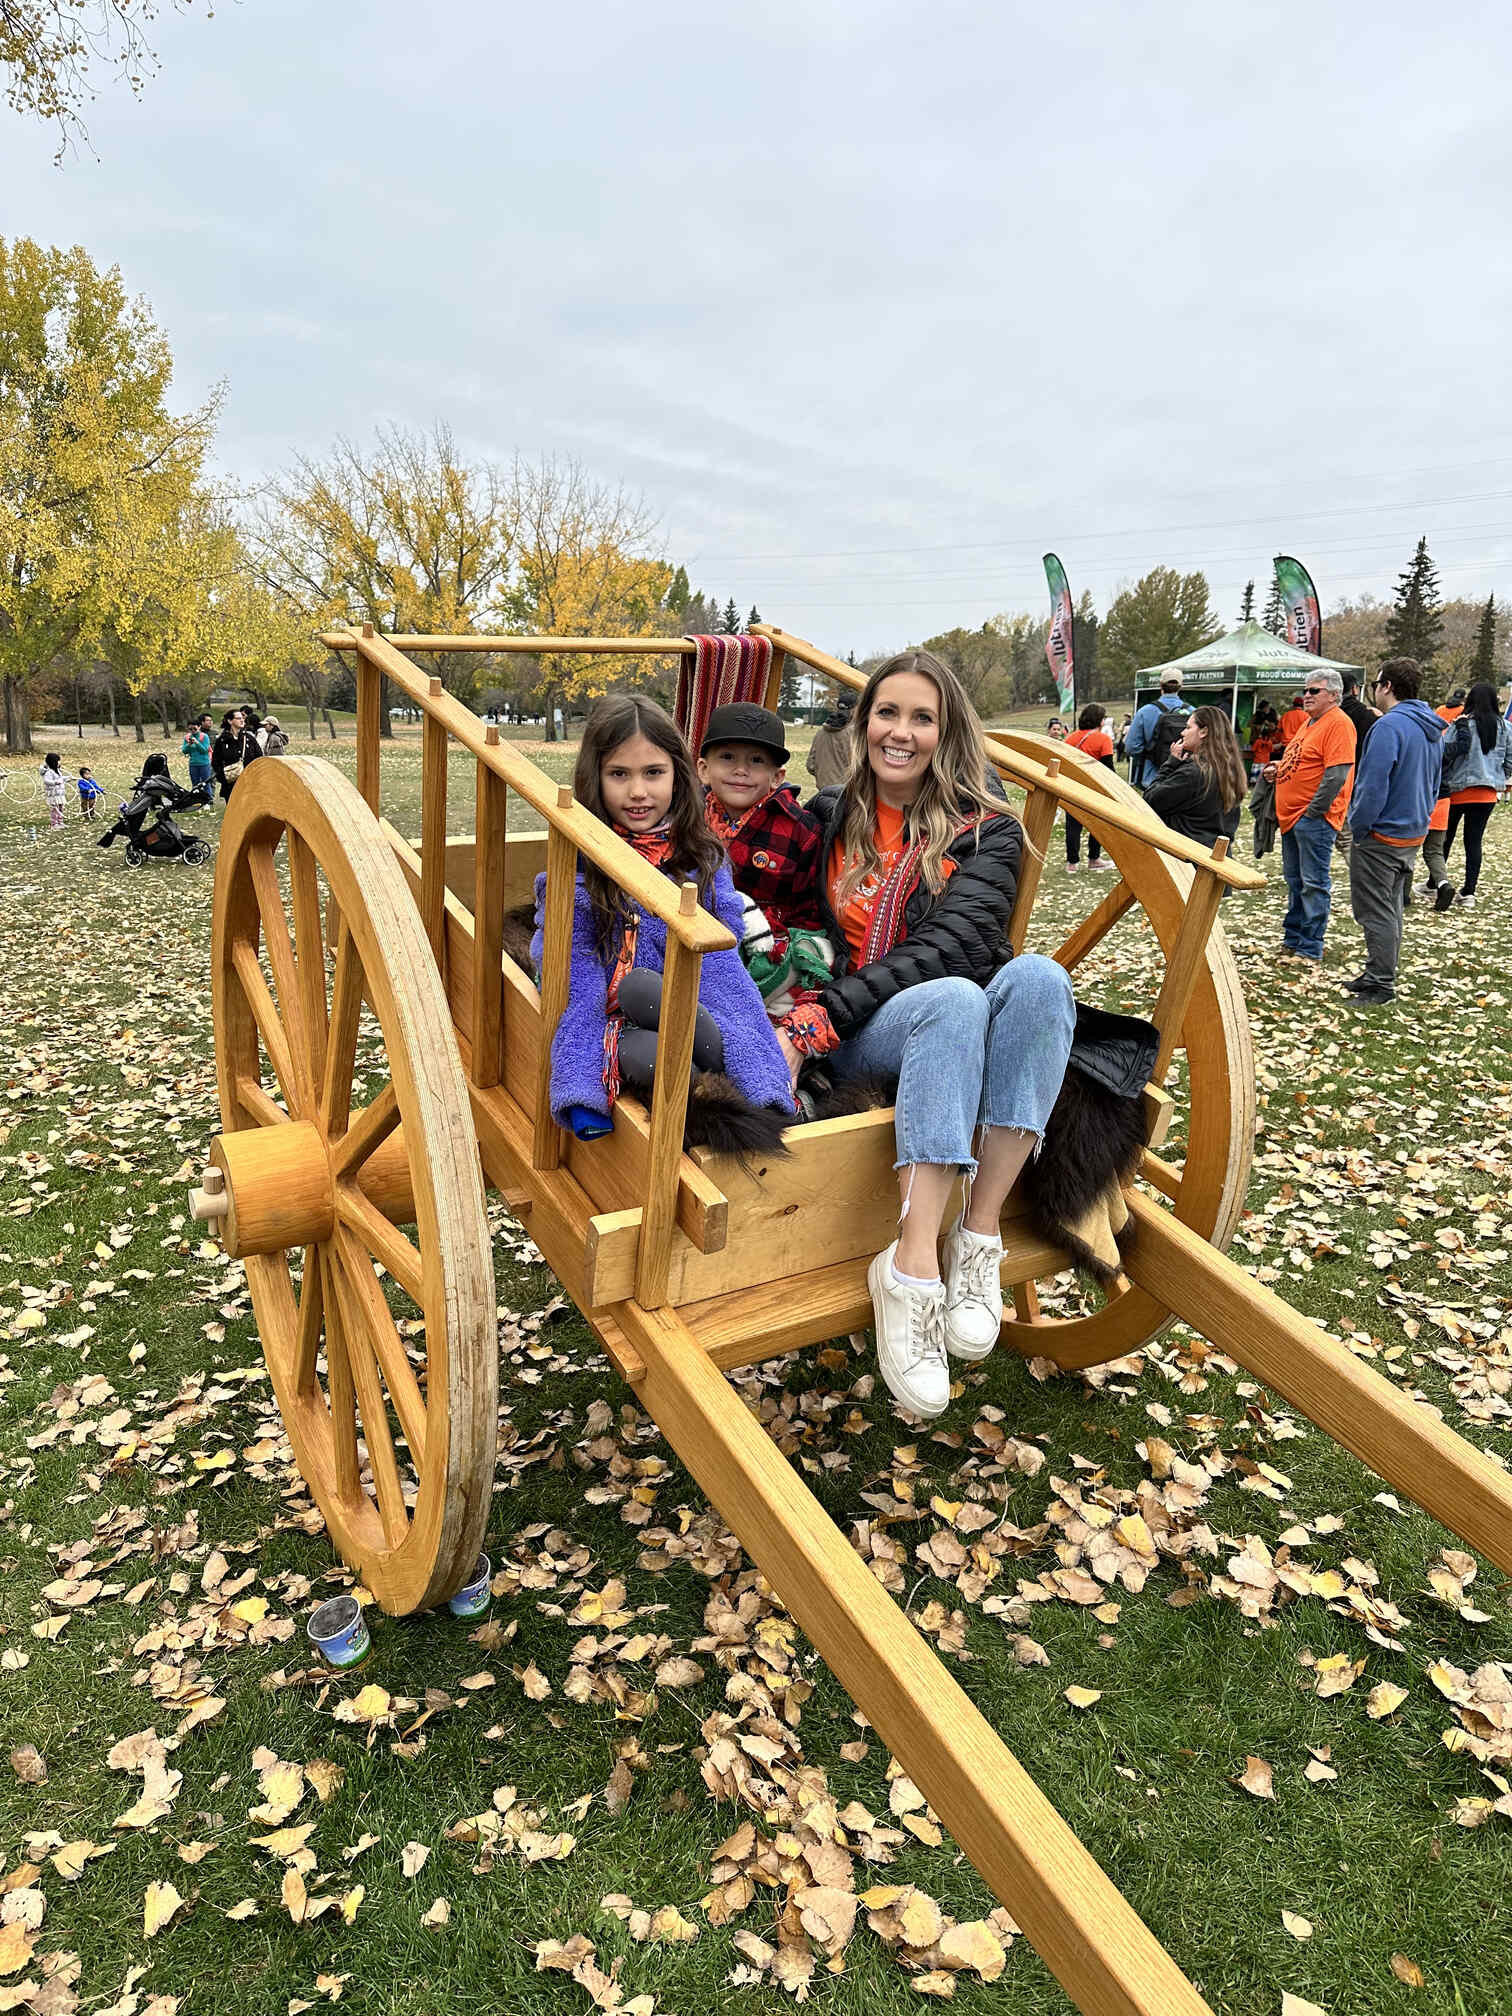 A Métis woman and her two children, a young boy and girl, sitting in a wooden Red River cart in a green field, with autumn leaves on the ground around them.